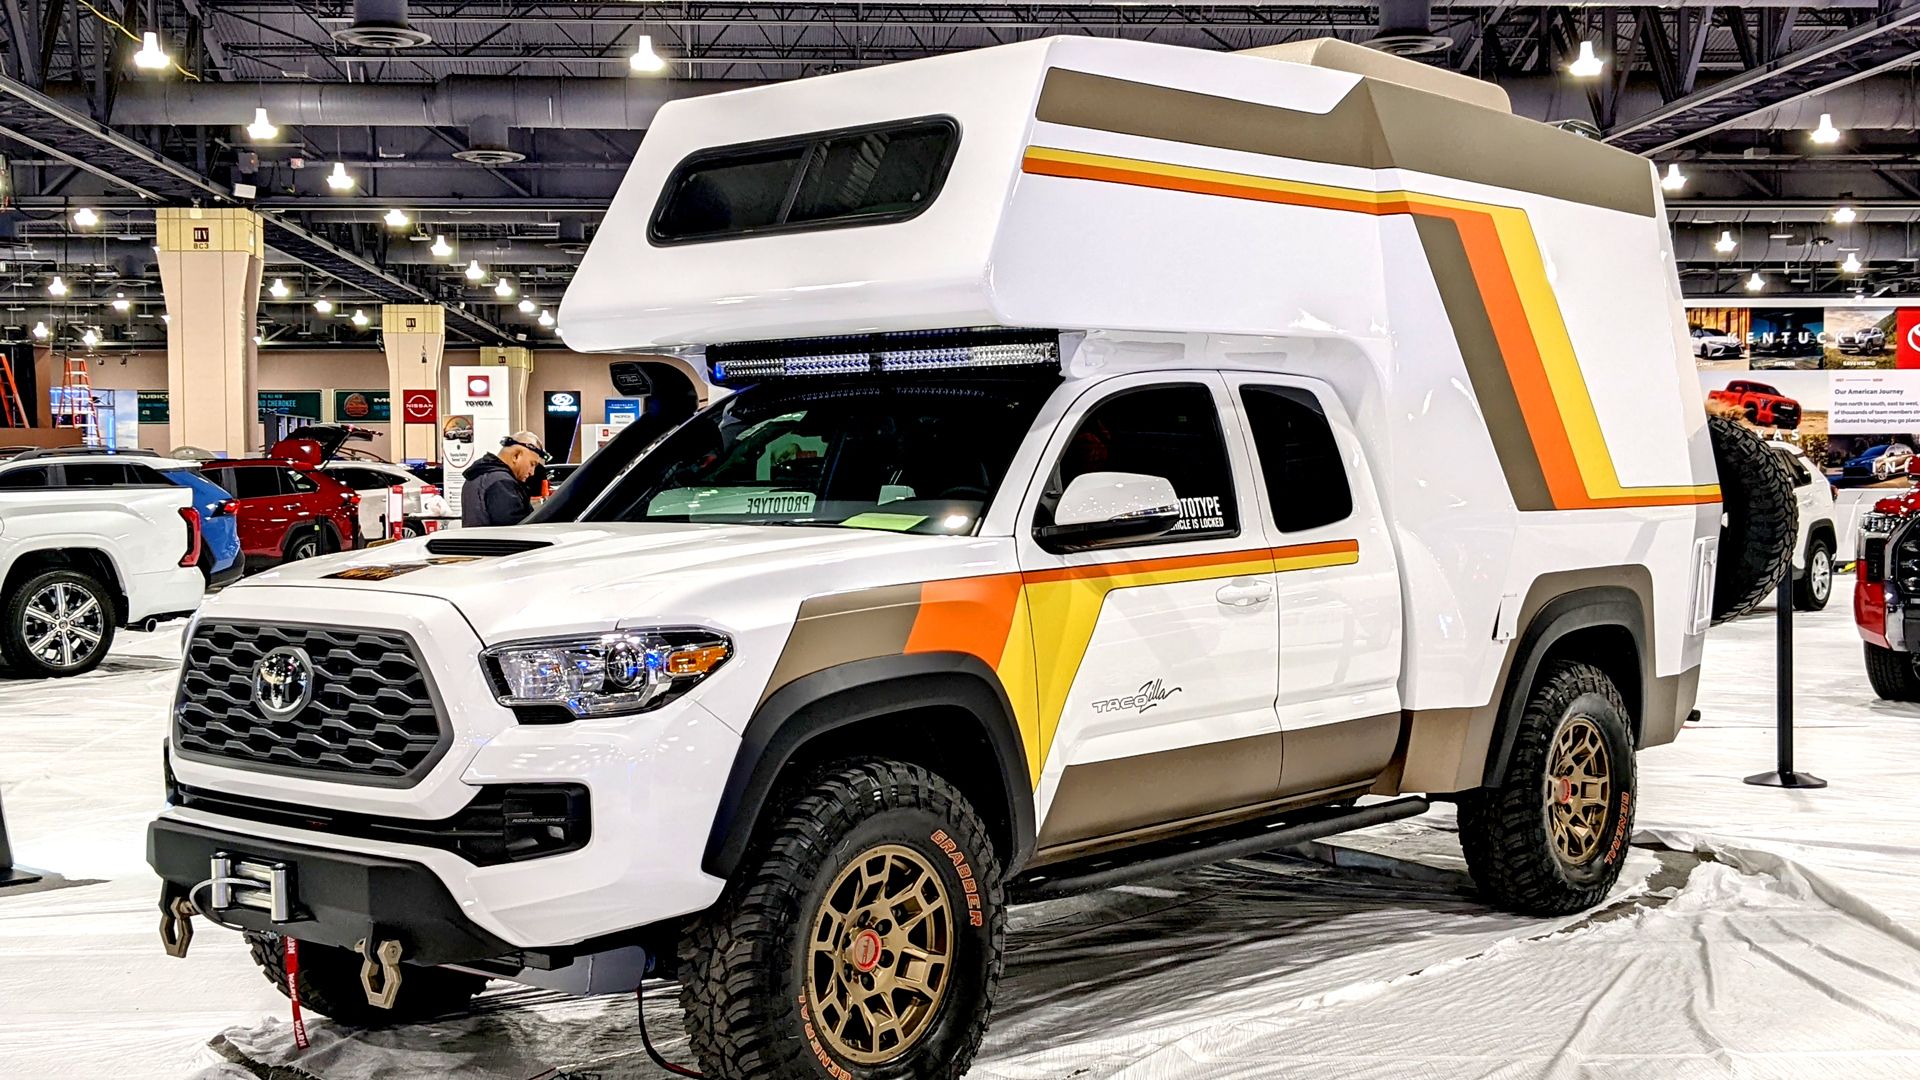 A prototype of a Toyota truck camper